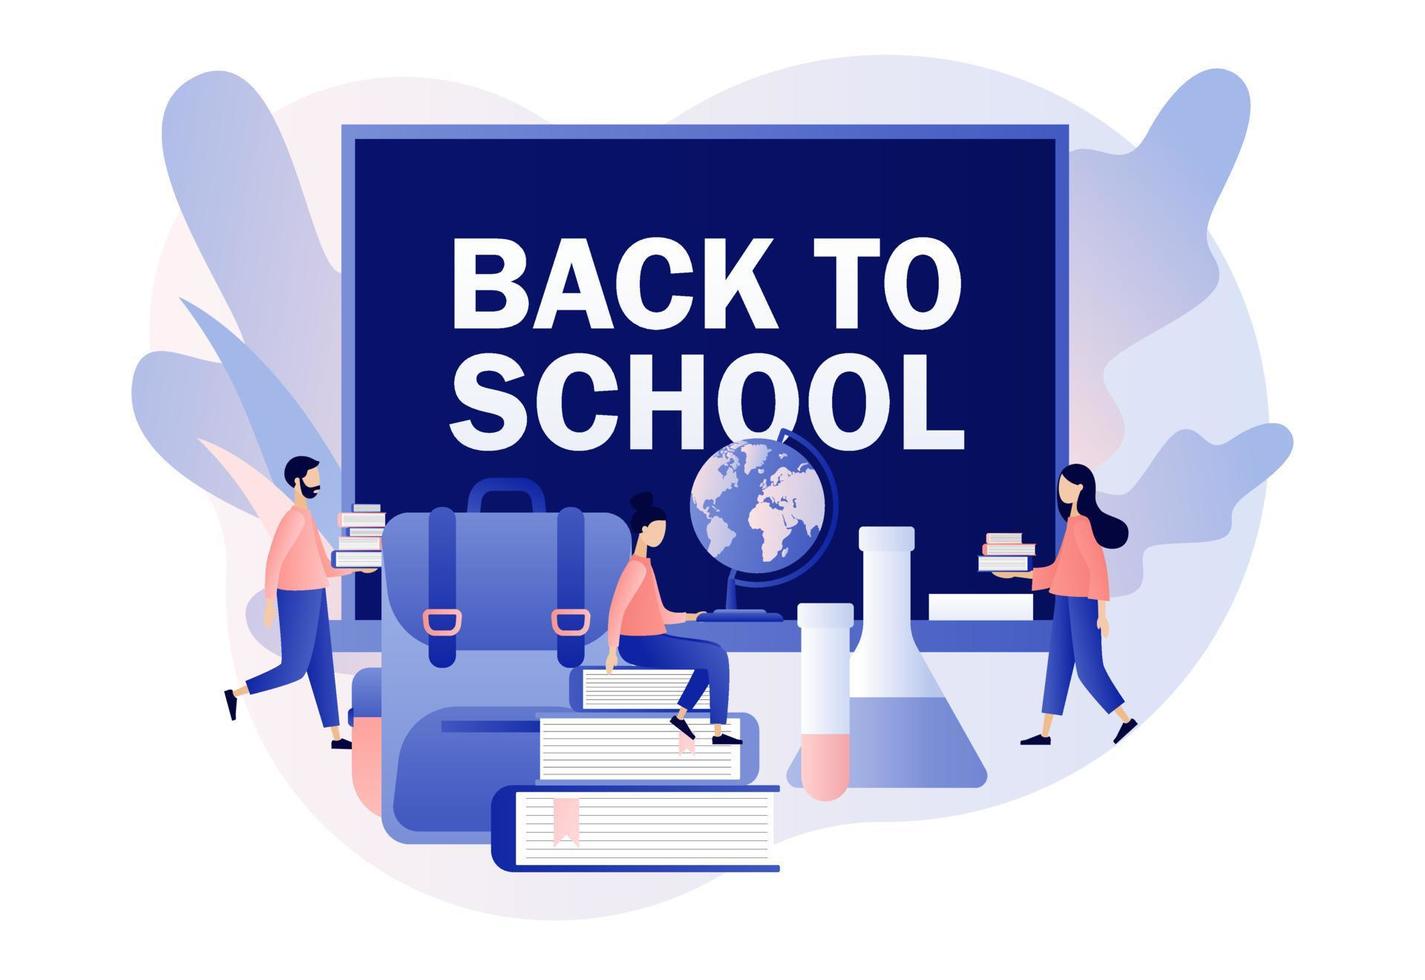 Back to School. Education concept. Tiny people with big blackboard, backpack, educational tools, school stationery, globe and books. Modern flat cartoon style. Vector illustration on white background